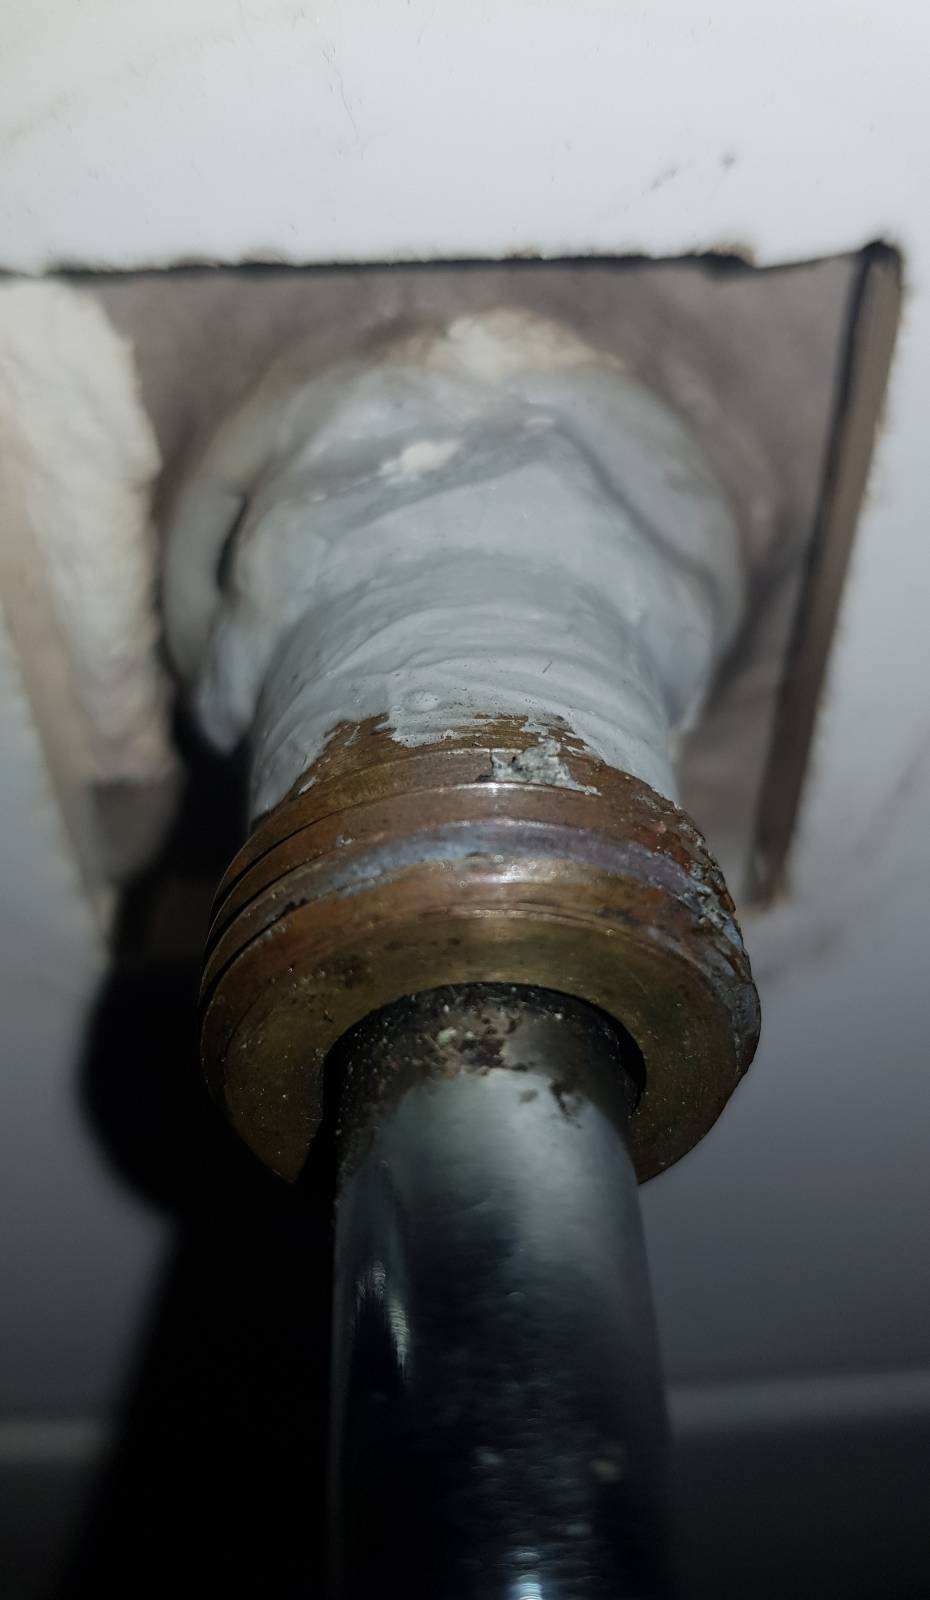 Tightening washer on sealed in taps